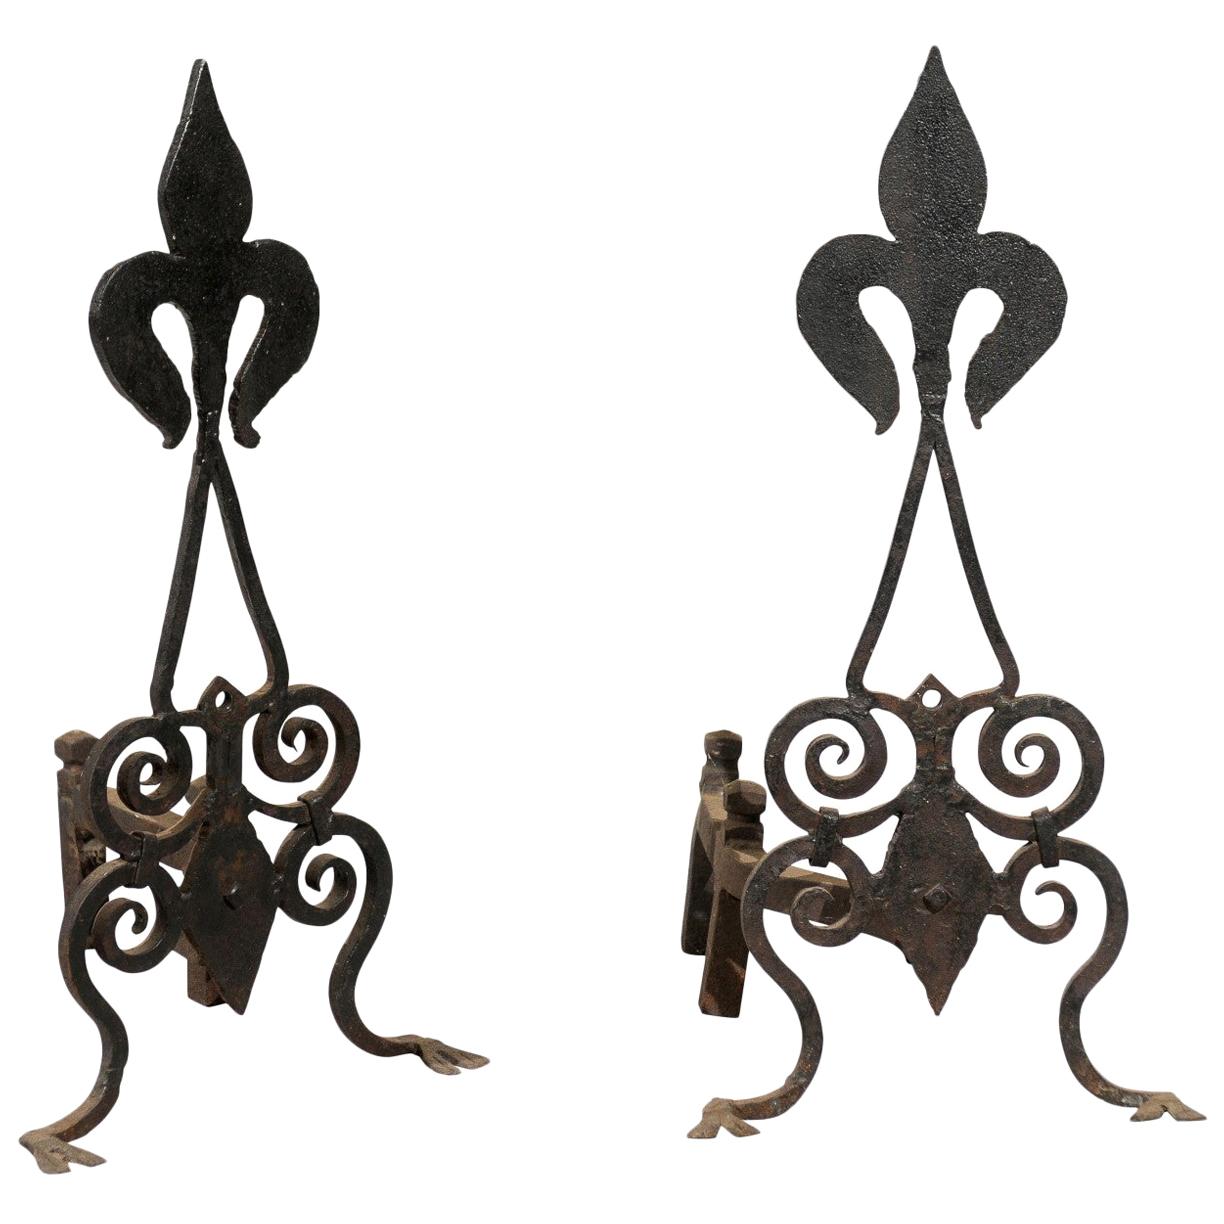 Pair of Late 19th-Early 20th Century American Black Fleur-de-Lis Andirons For Sale